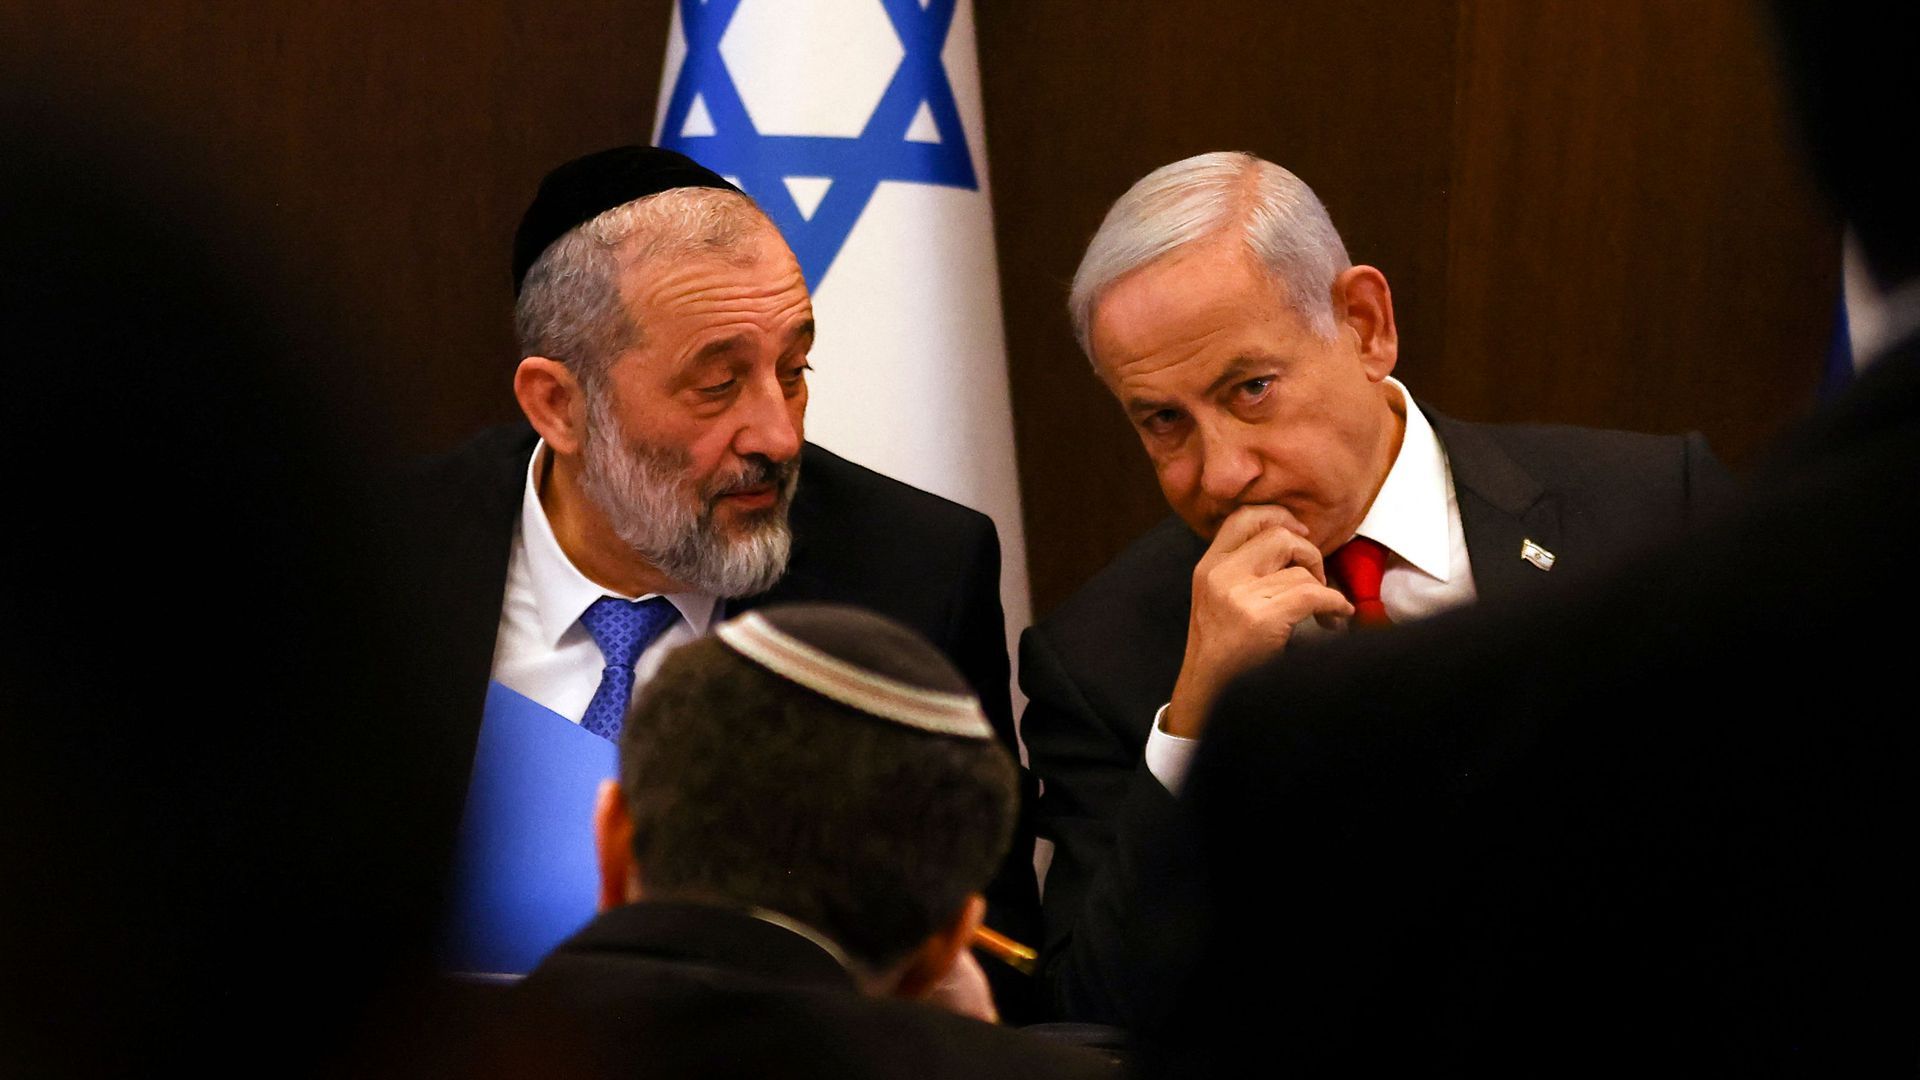 Israeli Interior Minister Aryeh Deri and Prime Minister Benjamin Netanyahu talk at a Cabinet meeting on Jan. 8. Photo: Ronen Zvulum/AFP via Getty Images